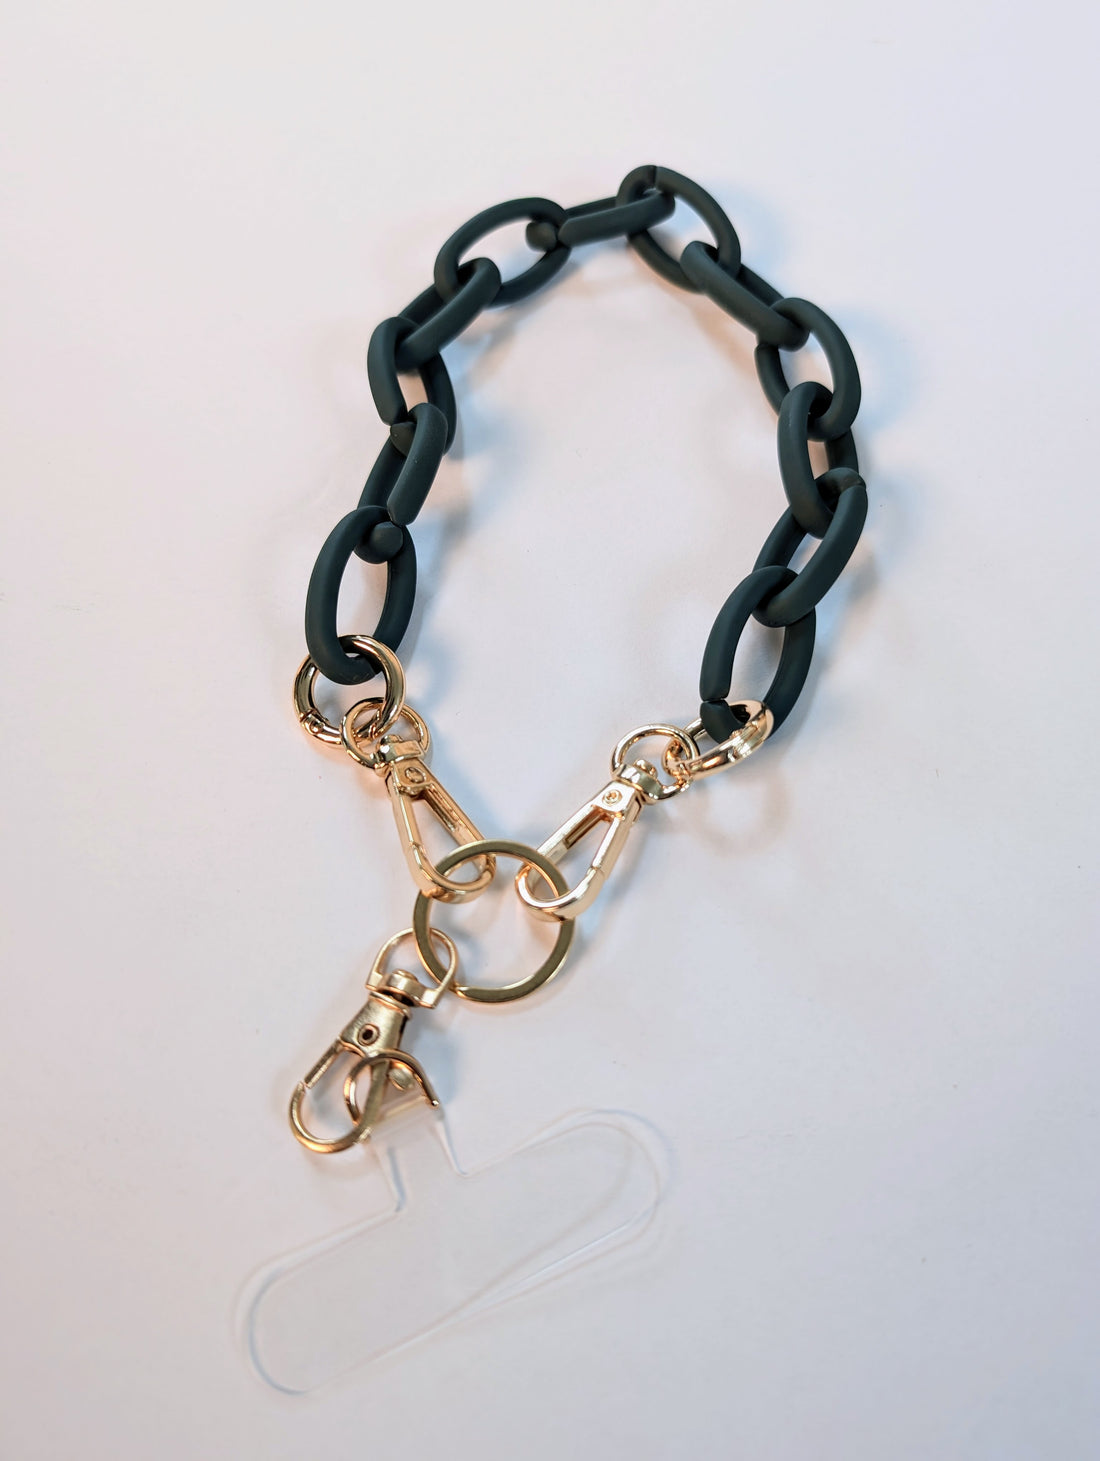 Fall Link Chain Phone or Bag Strap